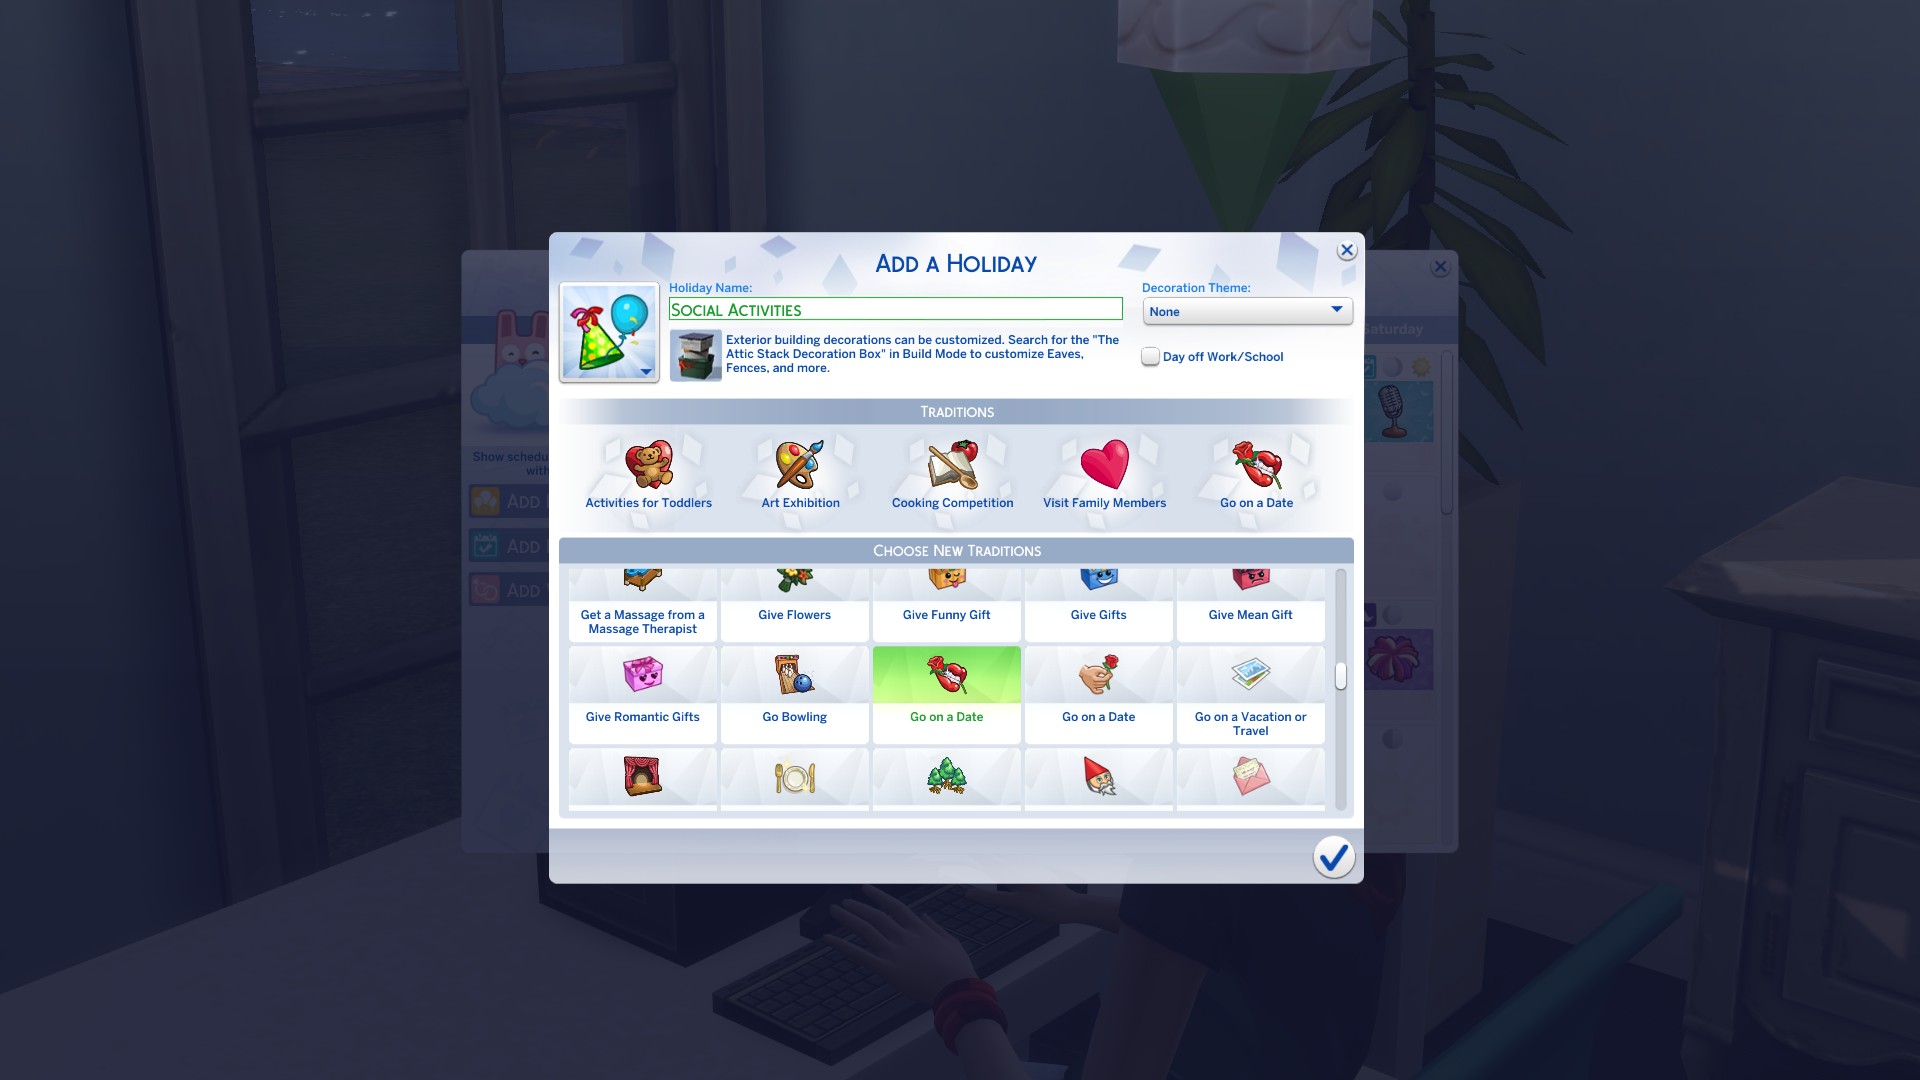 The best Sims 4 mods 2023